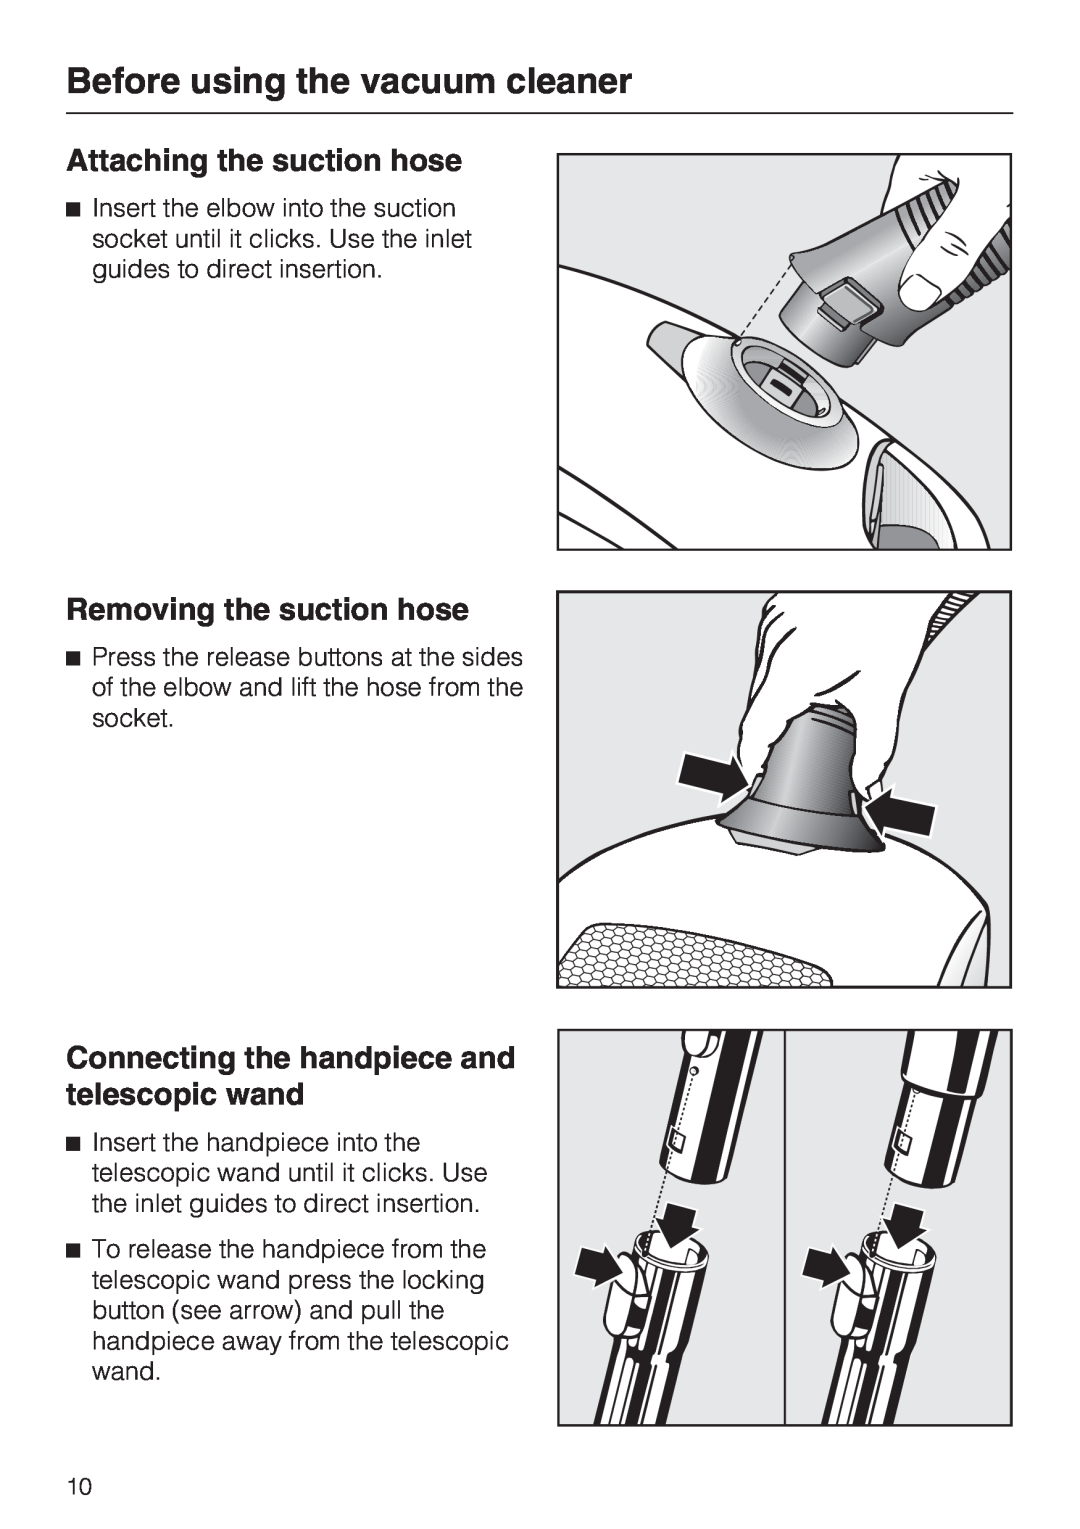 Miele S 4002 manual Before using the vacuum cleaner, Attaching the suction hose, Removing the suction hose 